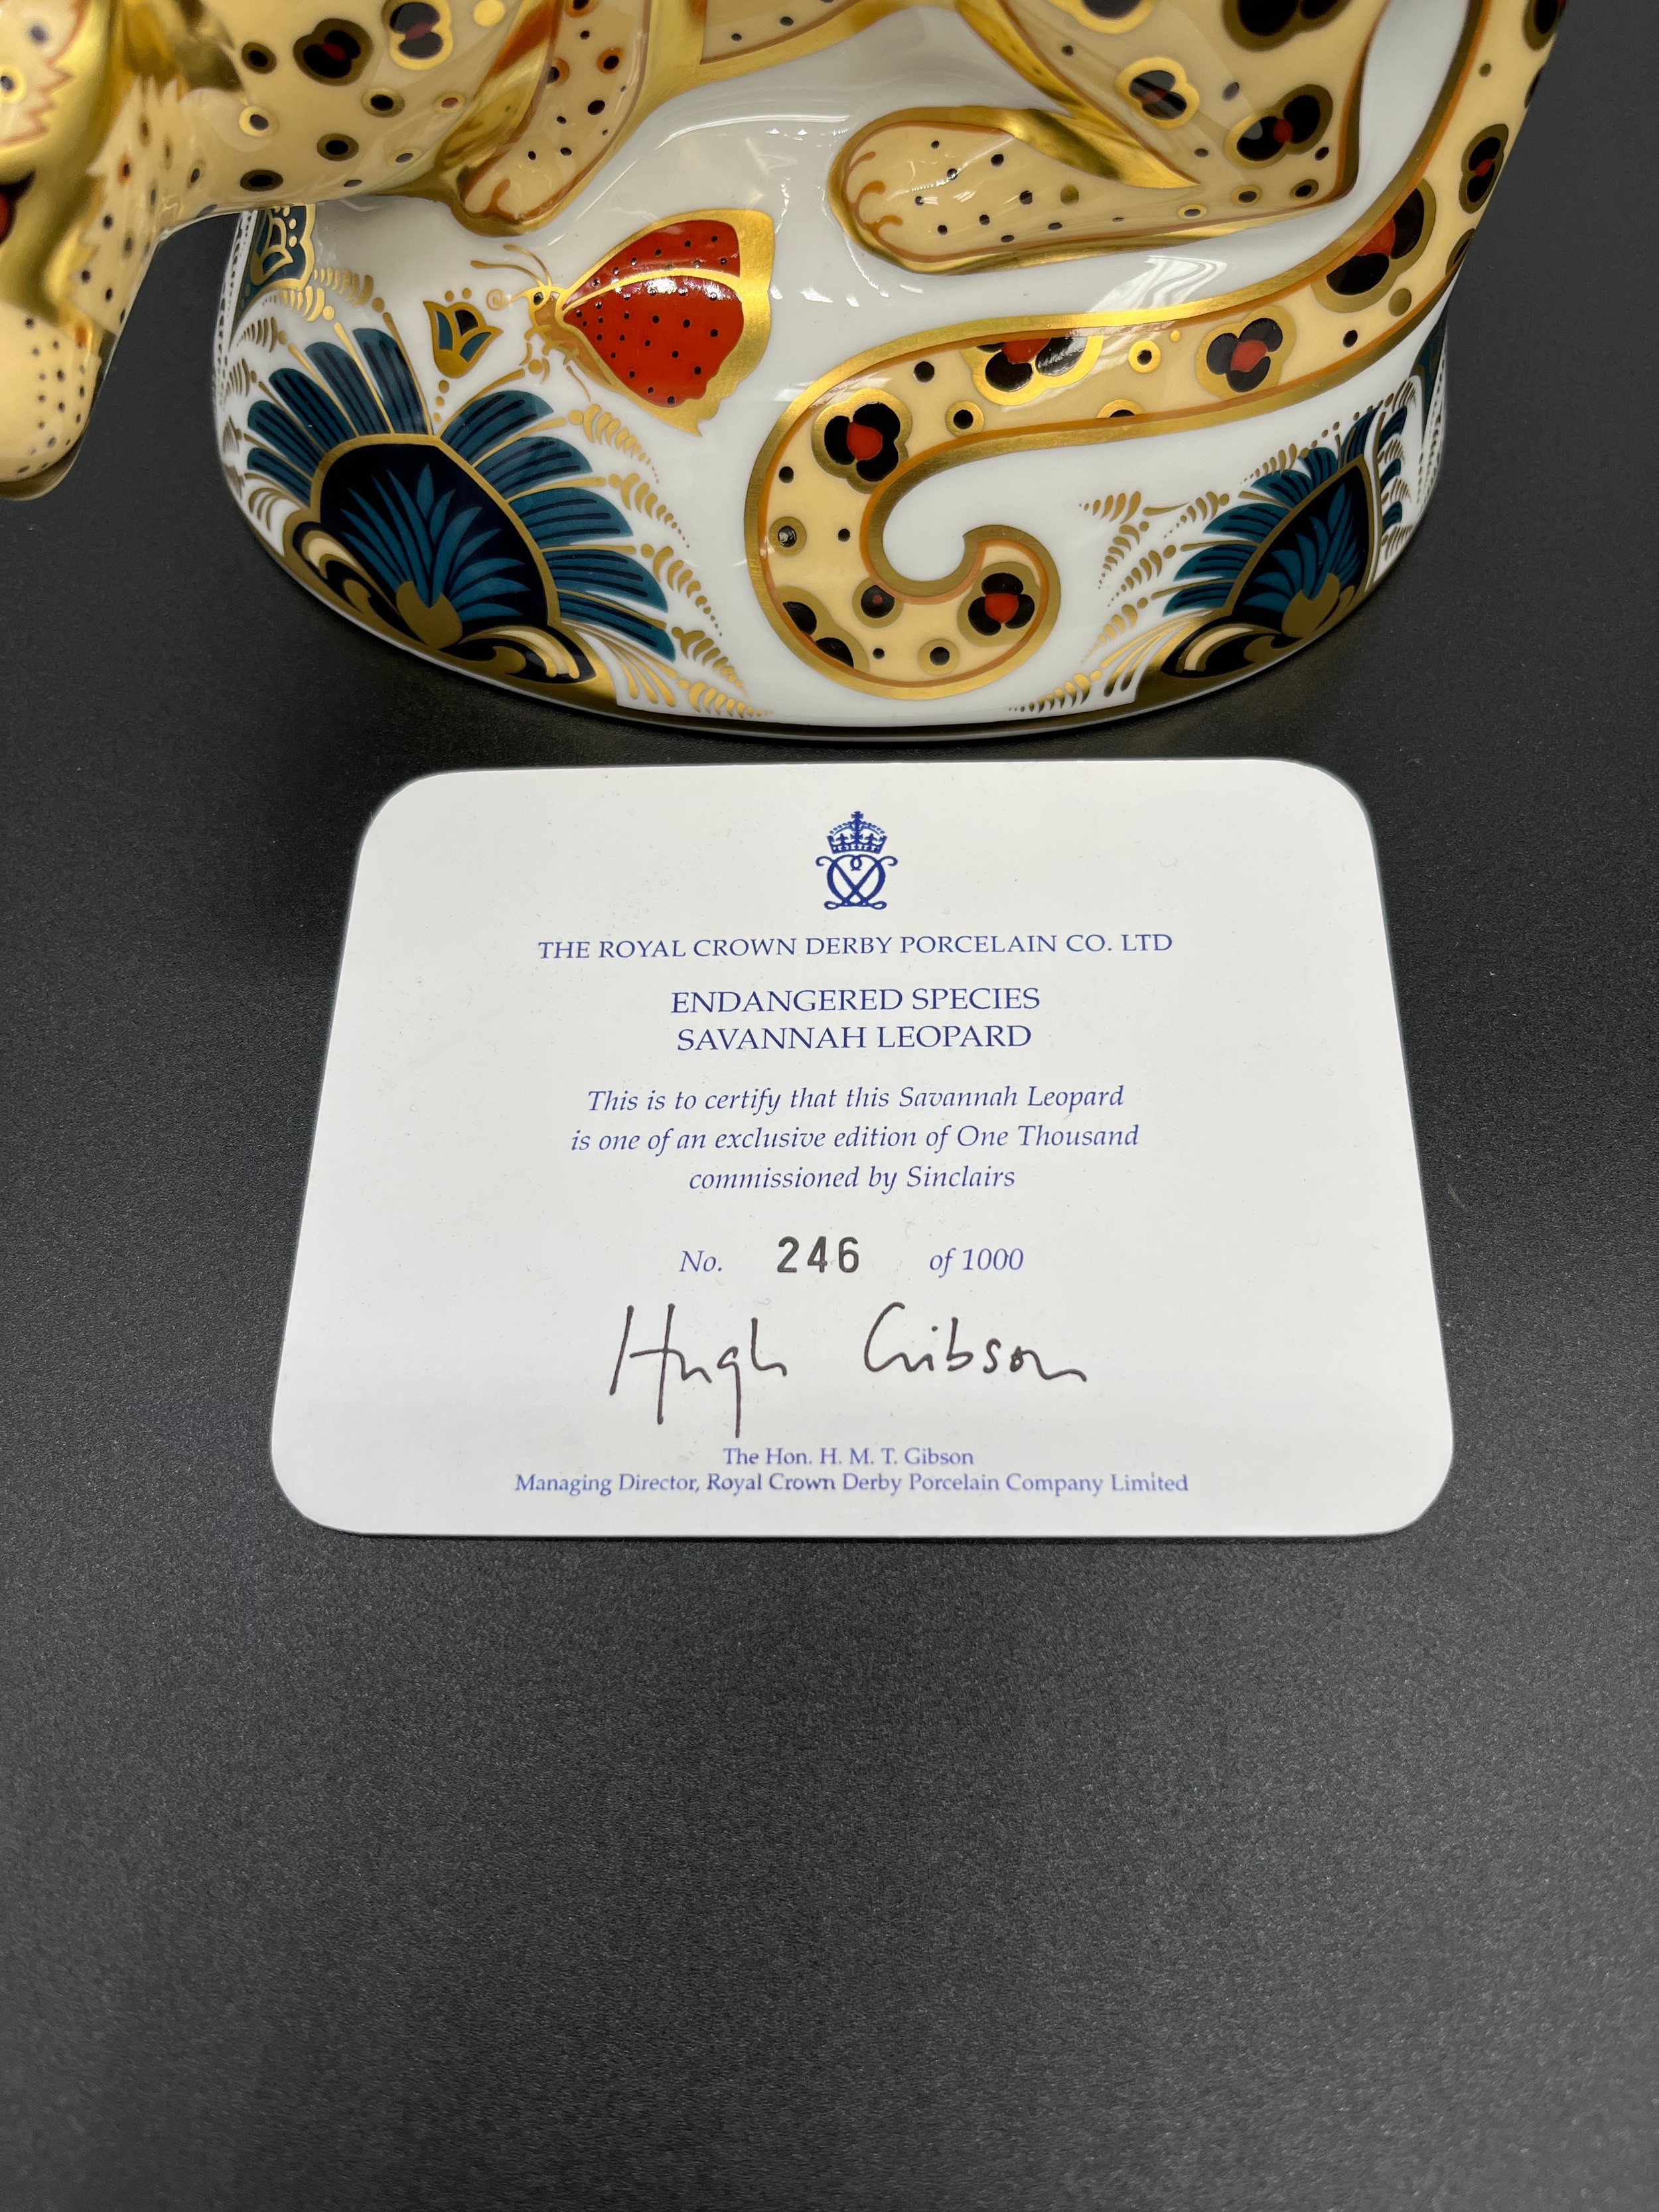 Royal Crown Derby paperweight 'Endangered Species Savannah Leopard' Limited edition 246 of 1000. - Image 2 of 3